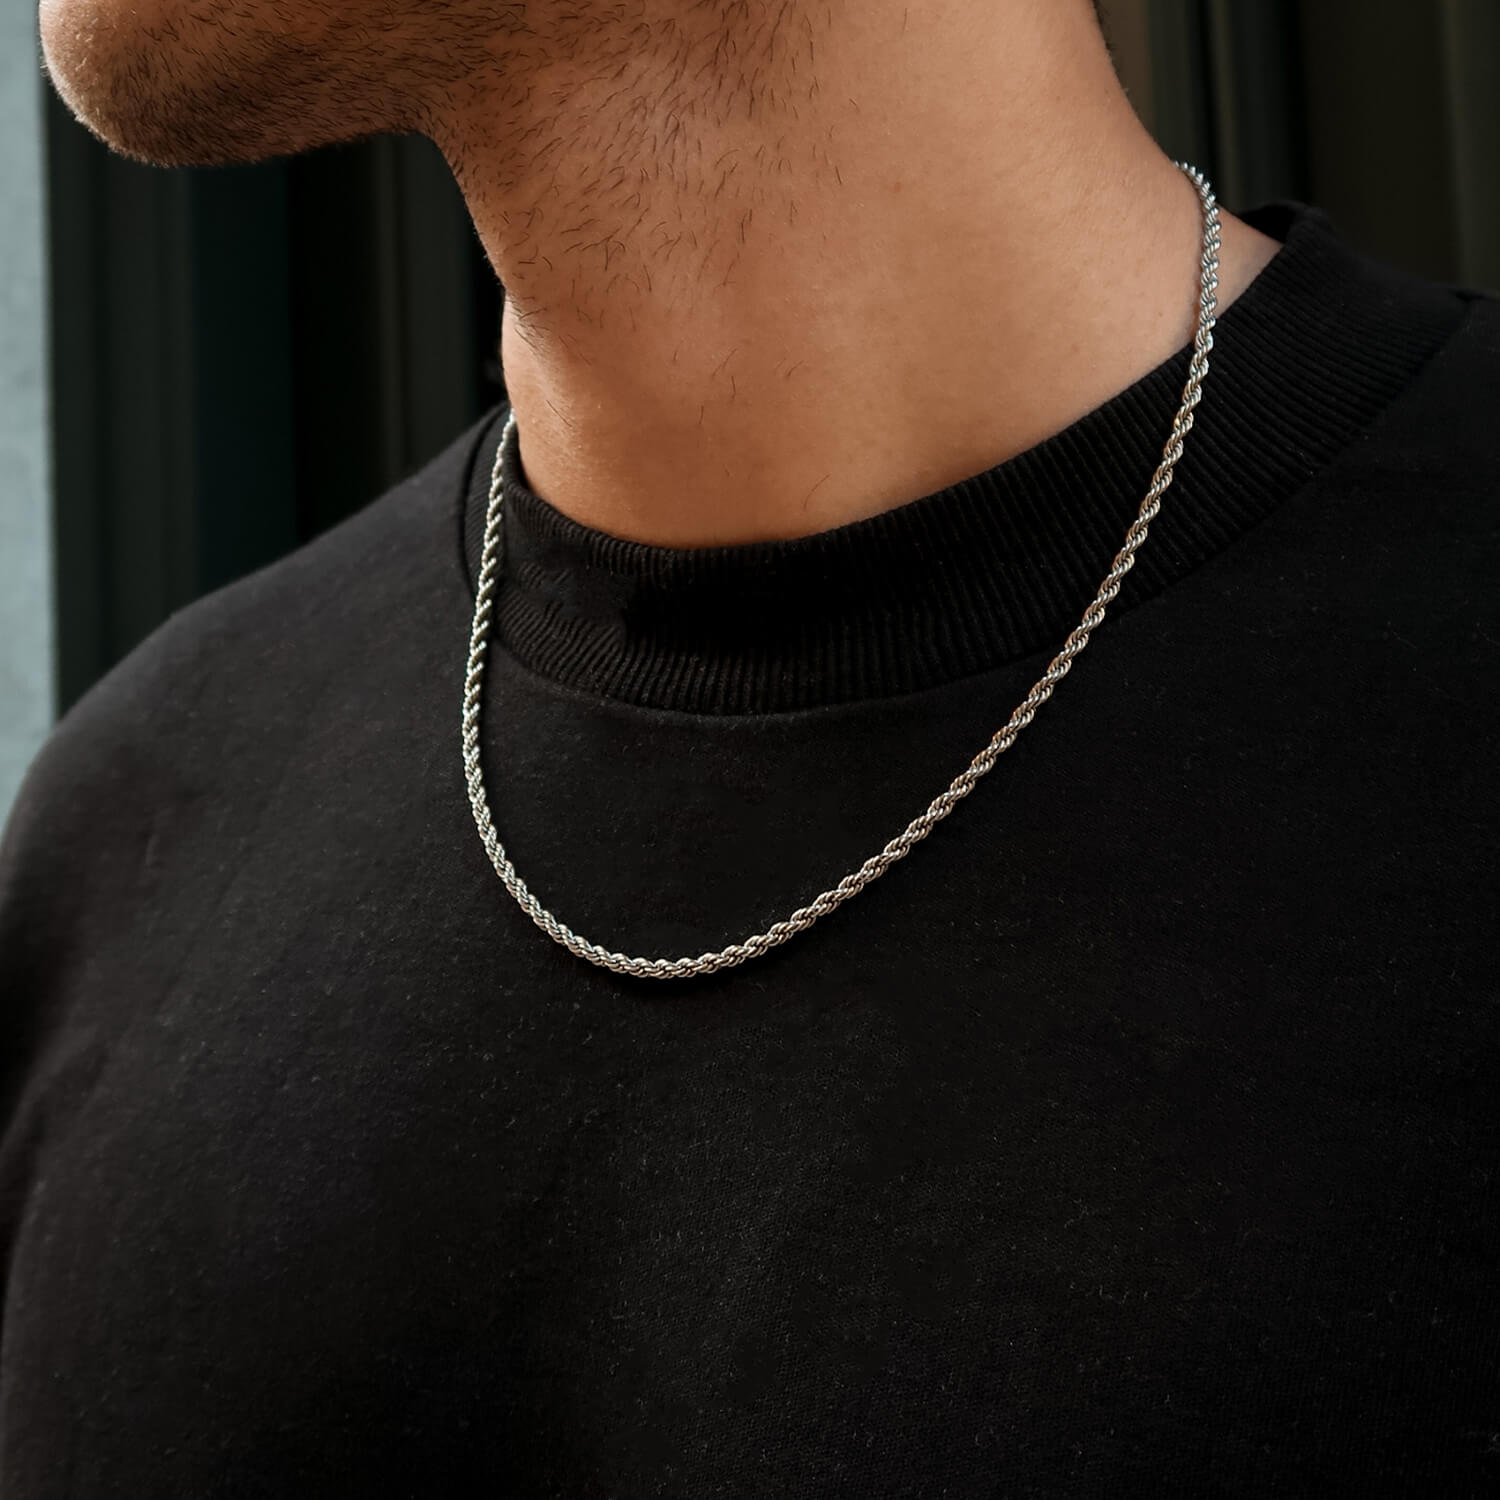 3mm silver rope chain on male neck